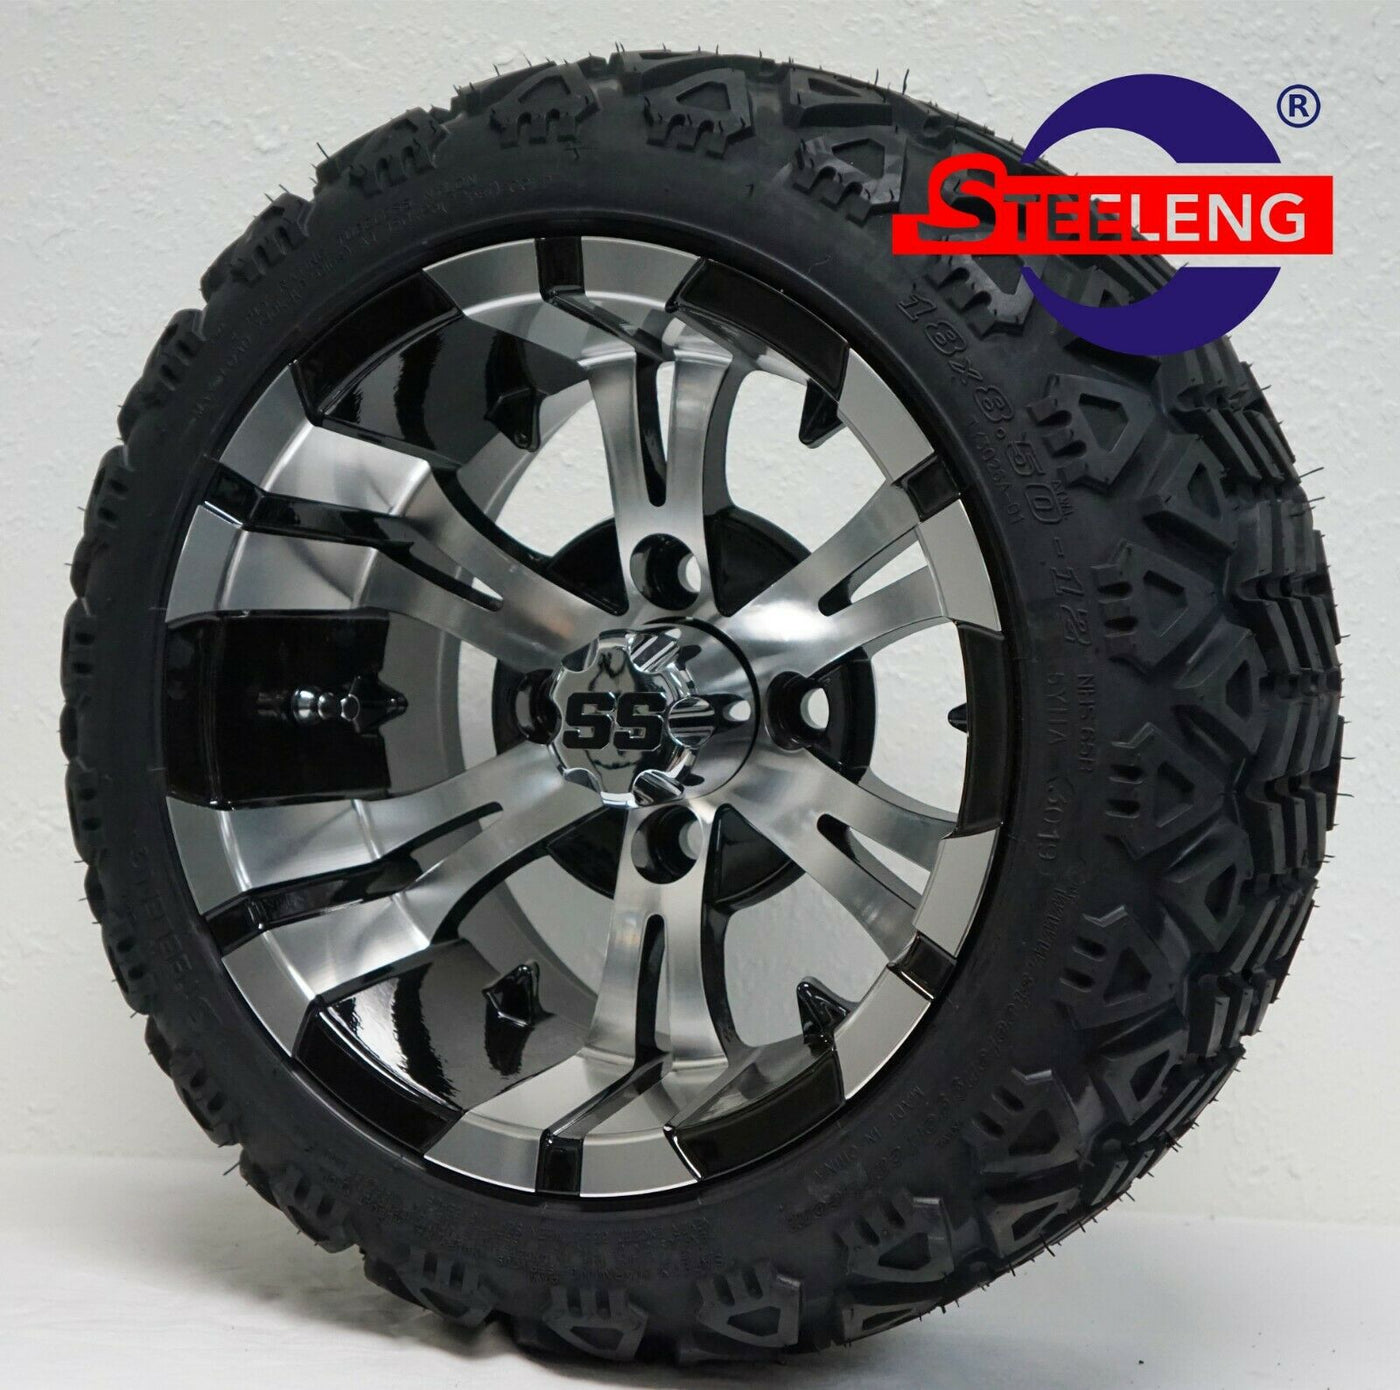 12" VAMPIRE Machined / BLACK GOLF CART WHEELS and 12x7-18 ALL TERRAIN TIRES (SET OF 4) WITH LUGS